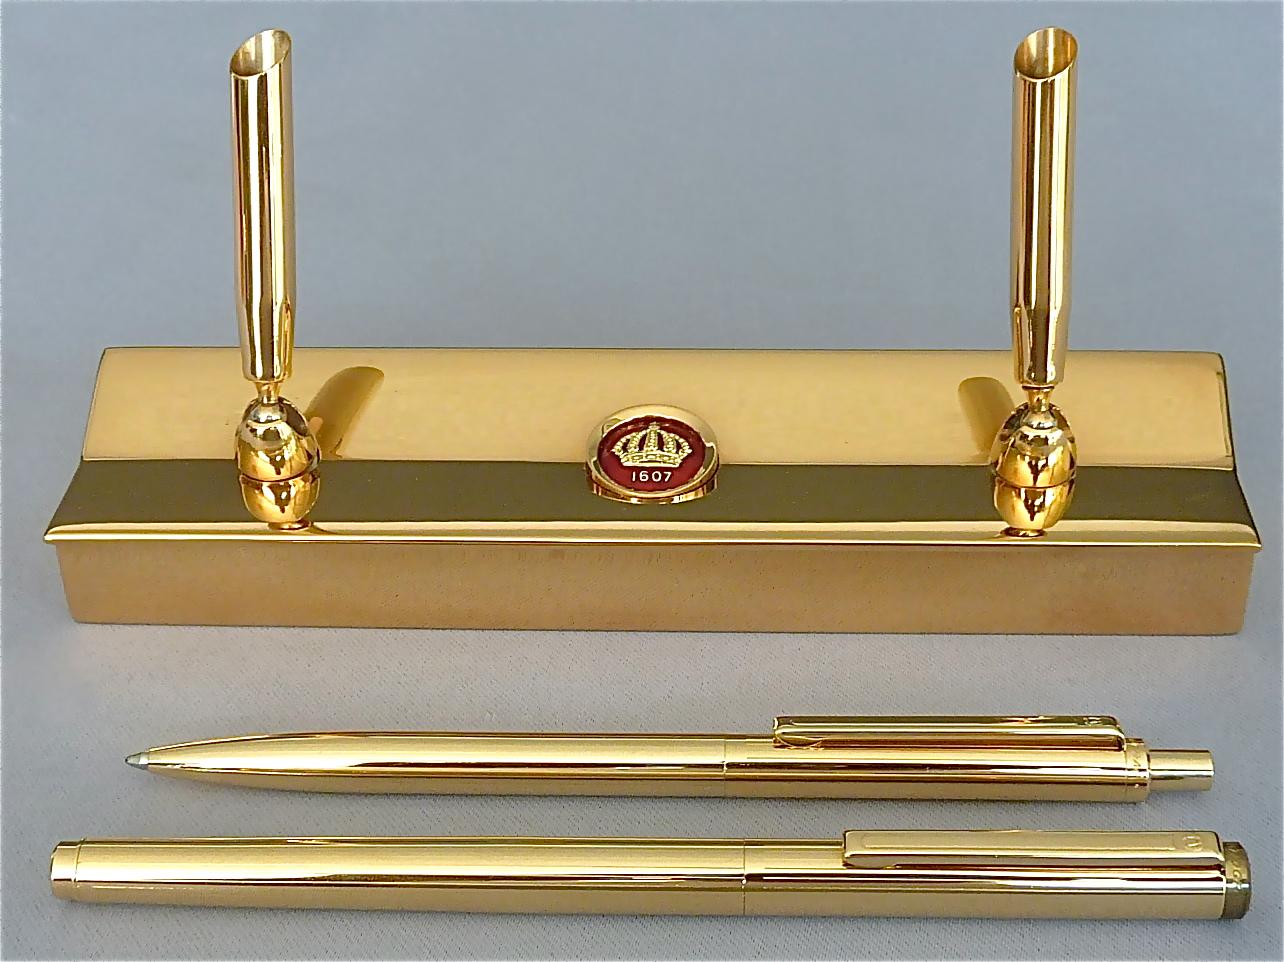 Rare and beautiful writing desk set designed by Pierre Forsell for Skultuna, Sweden circa 1960s-1970s. The heavy and high class quality set is made of gilt brass metal. It consists of a gilt ball pen and a fountain pen as well as a heavy base with